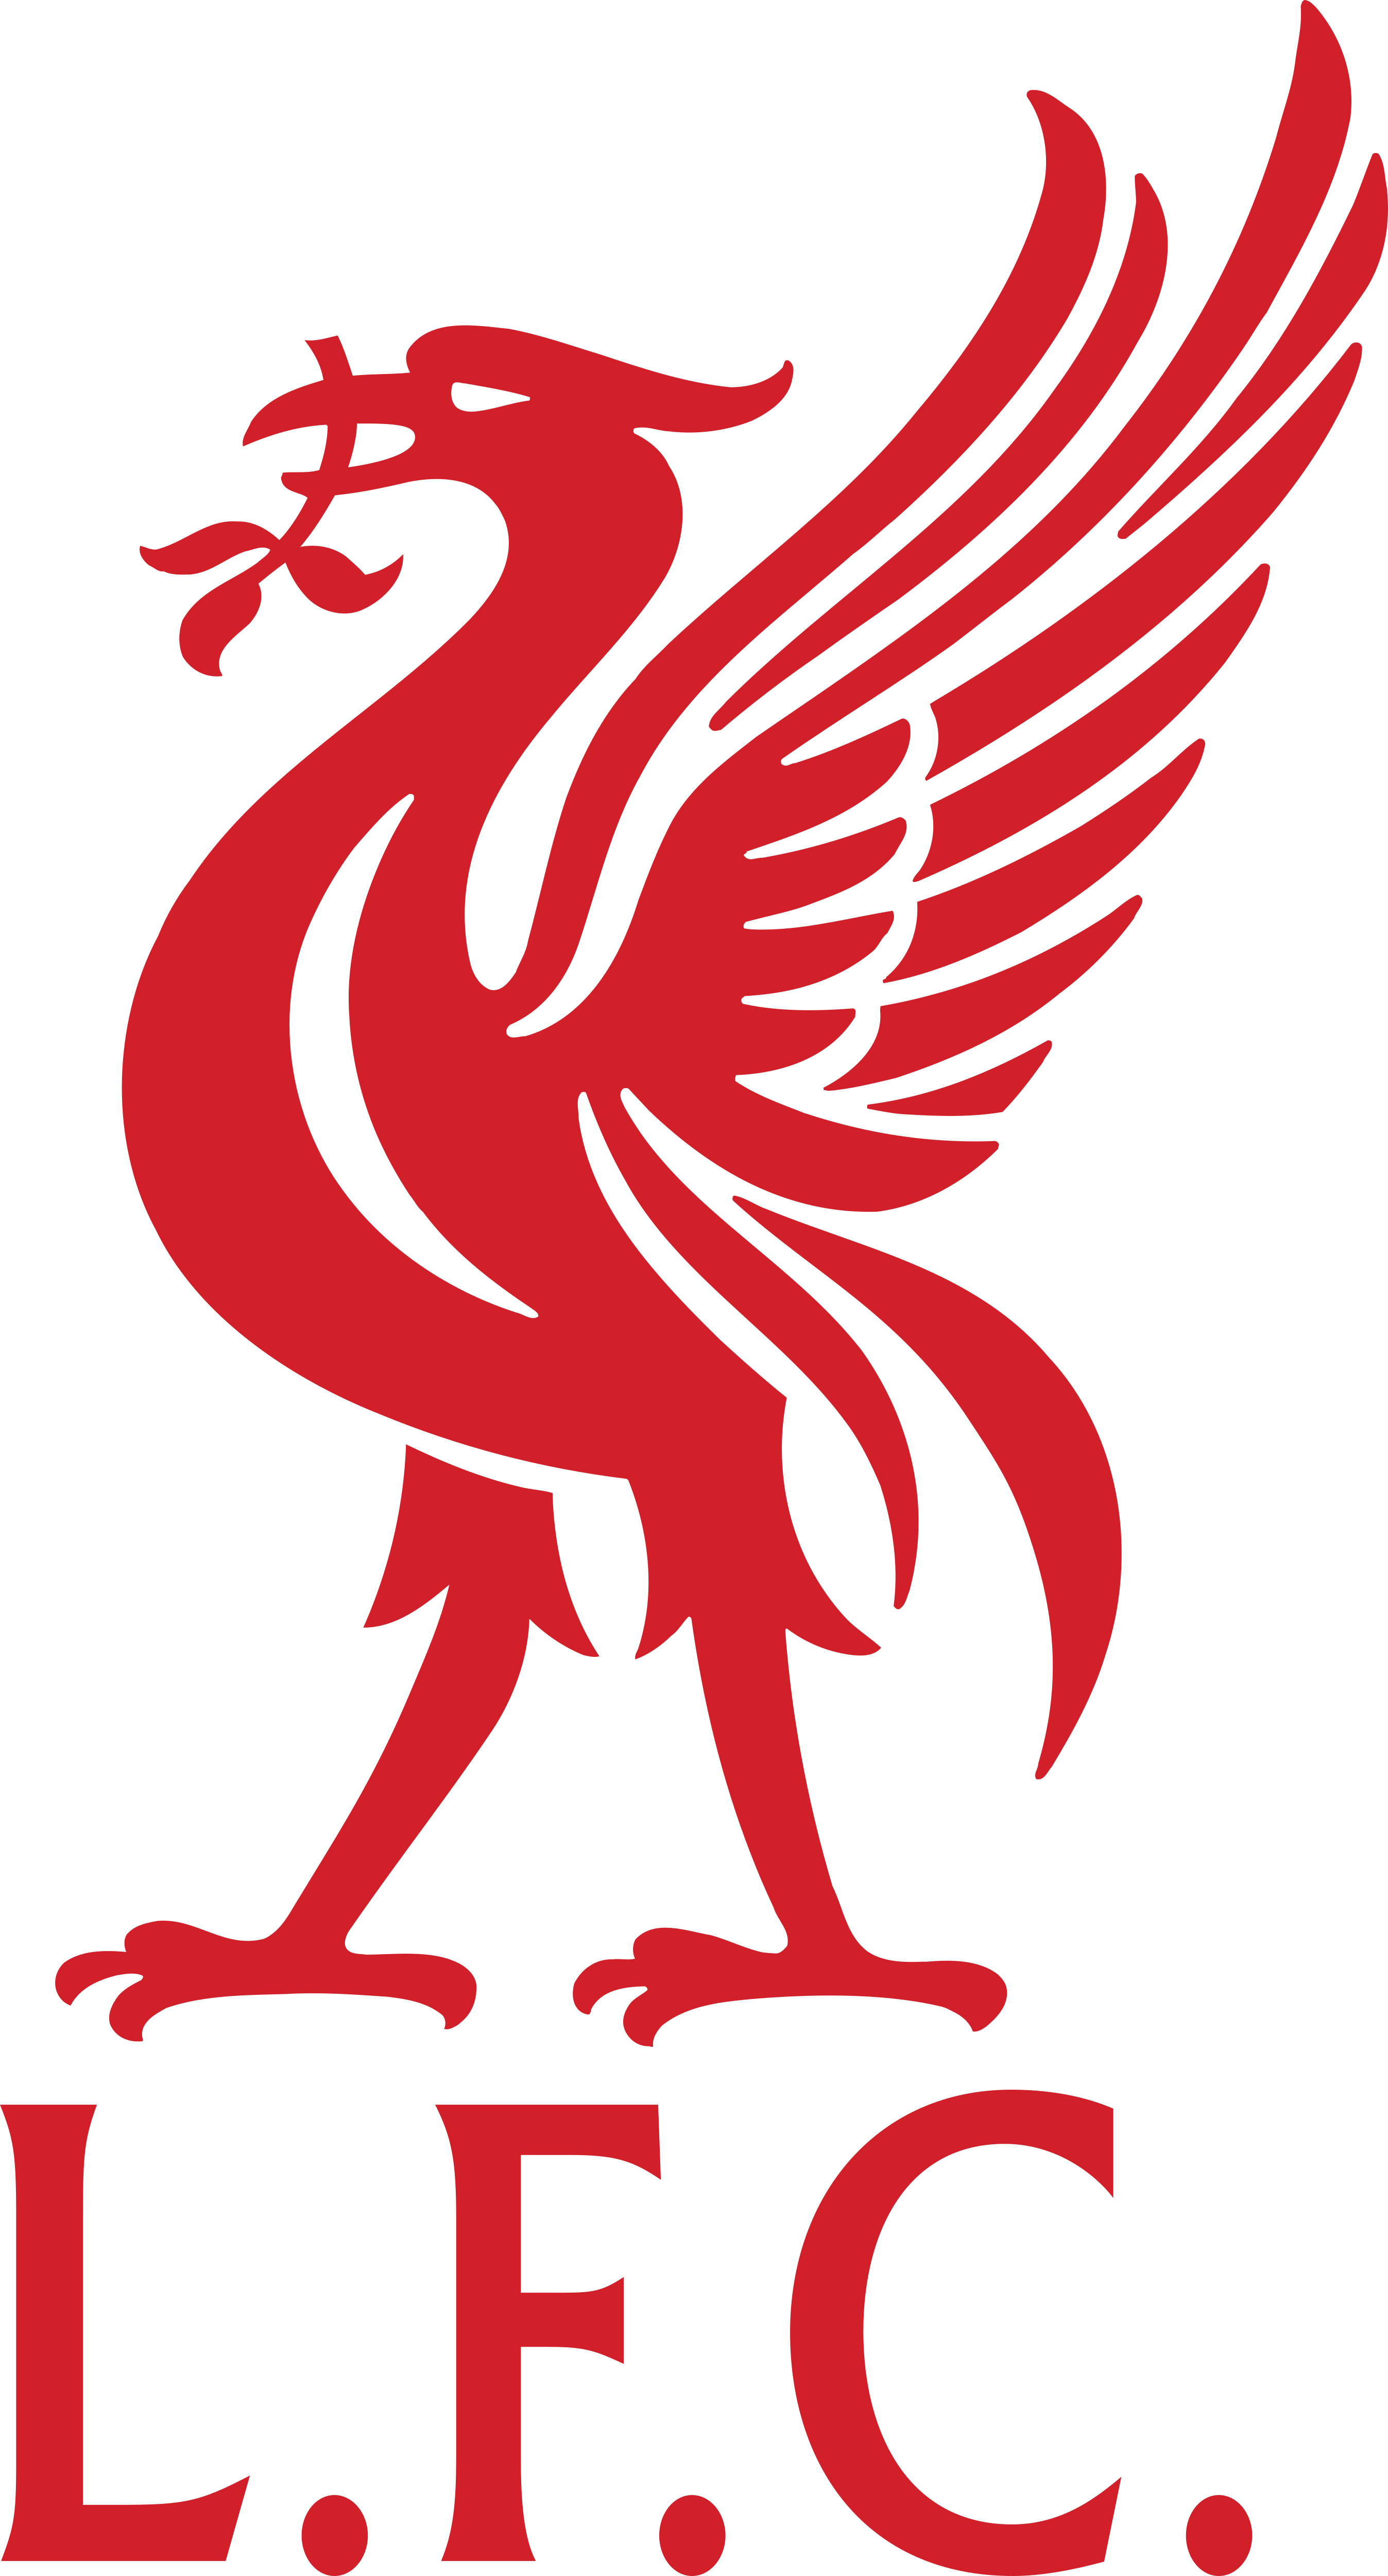 Liverpool Fc Tickets Telephone Number